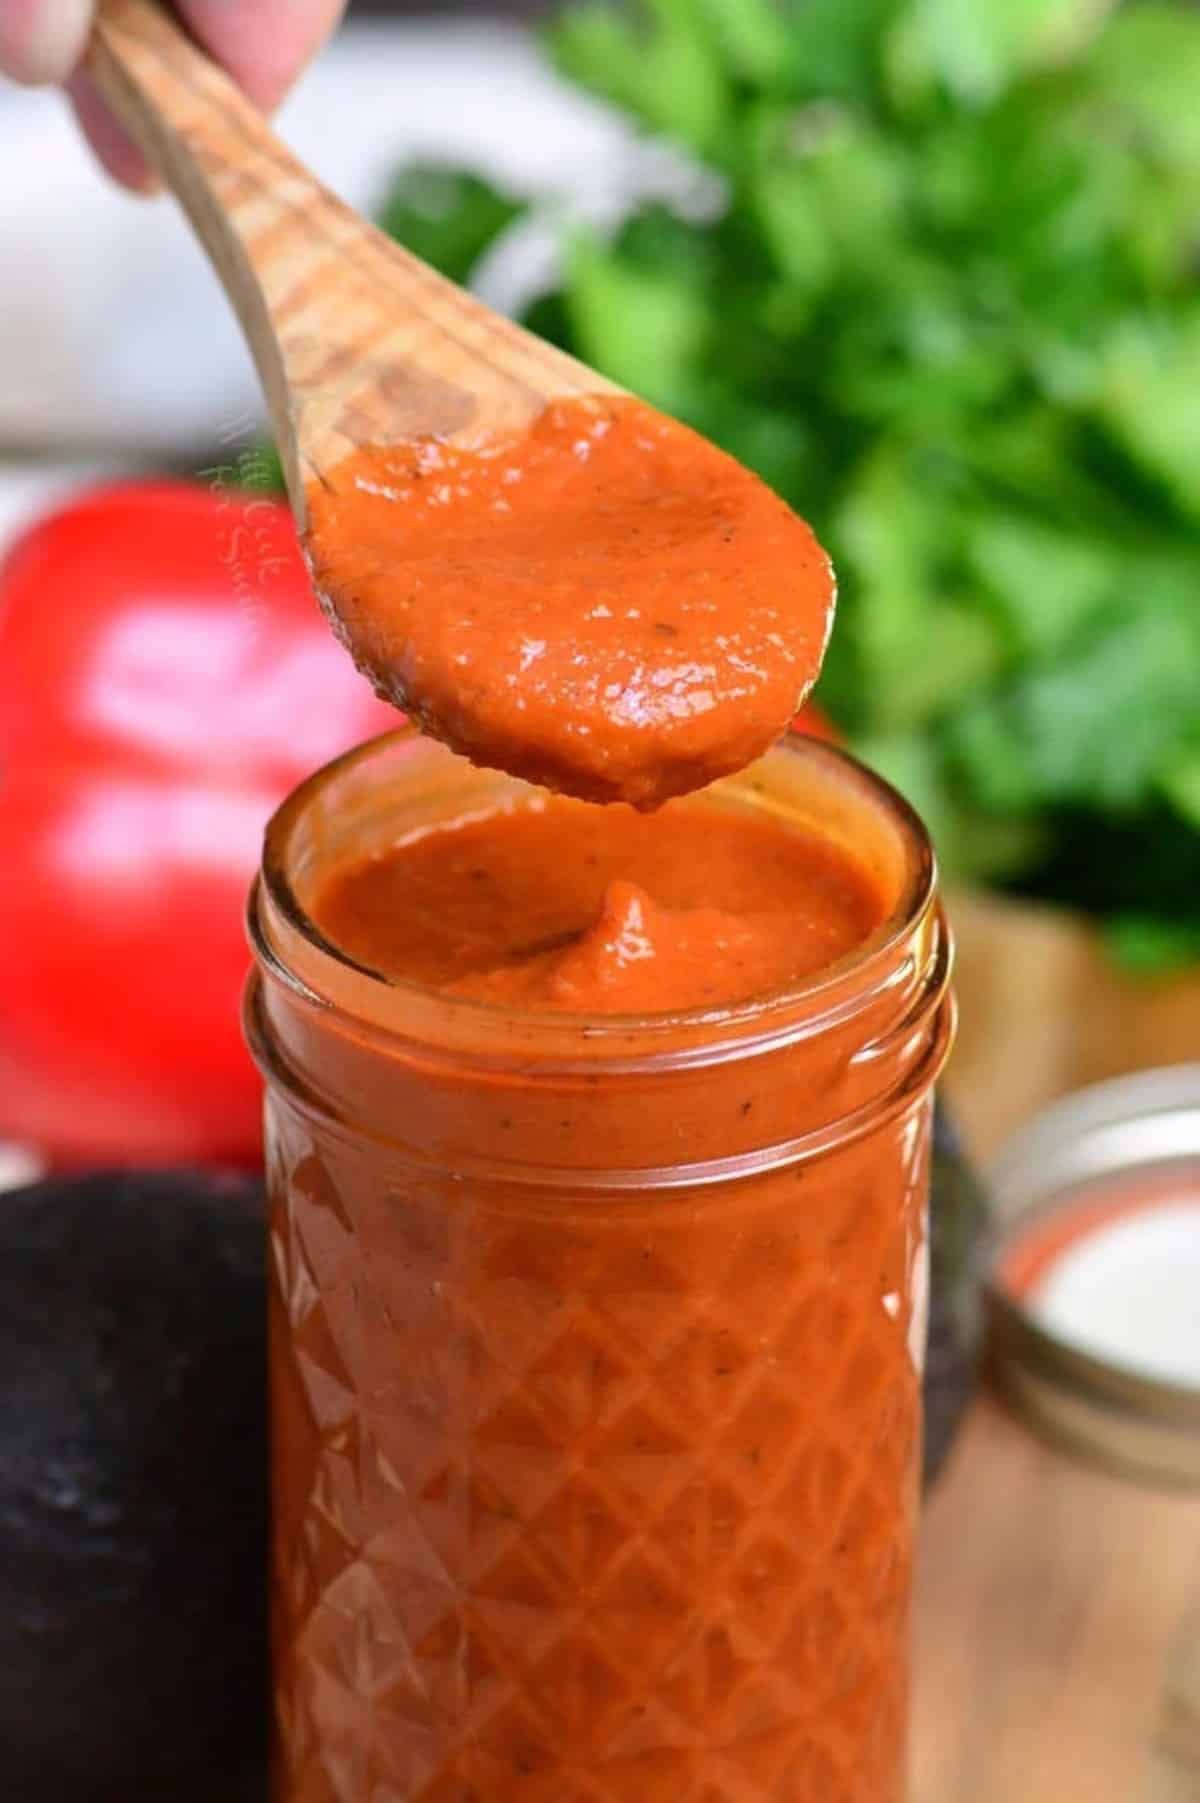 some enchilada sauce on a wooden spoon held over the glass jar of sauce.